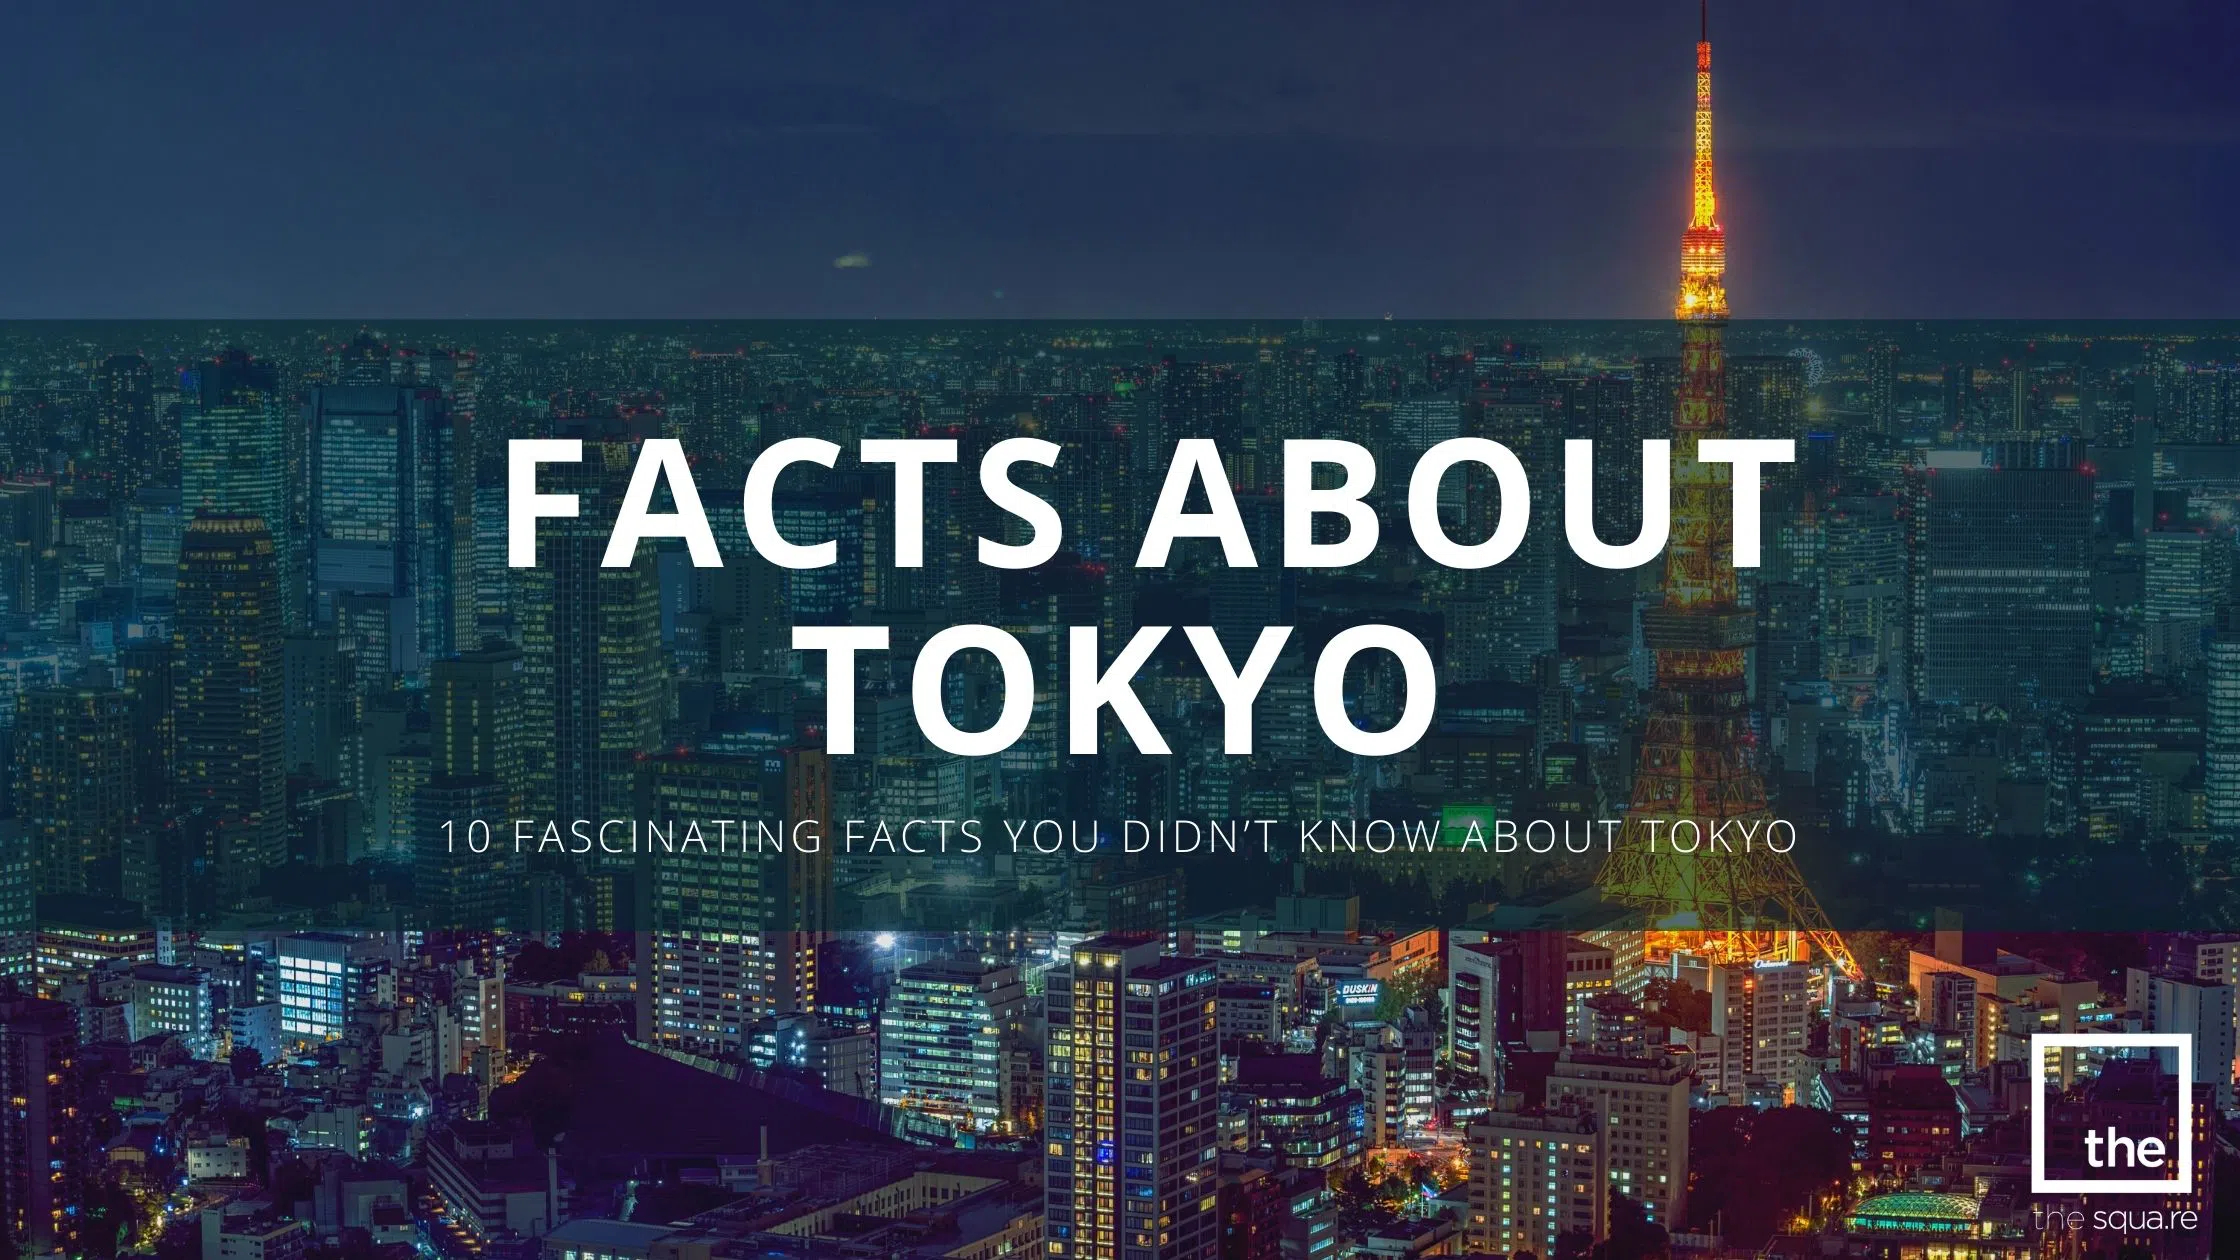 10 Fascinating Facts You Didn't Know About Tokyo